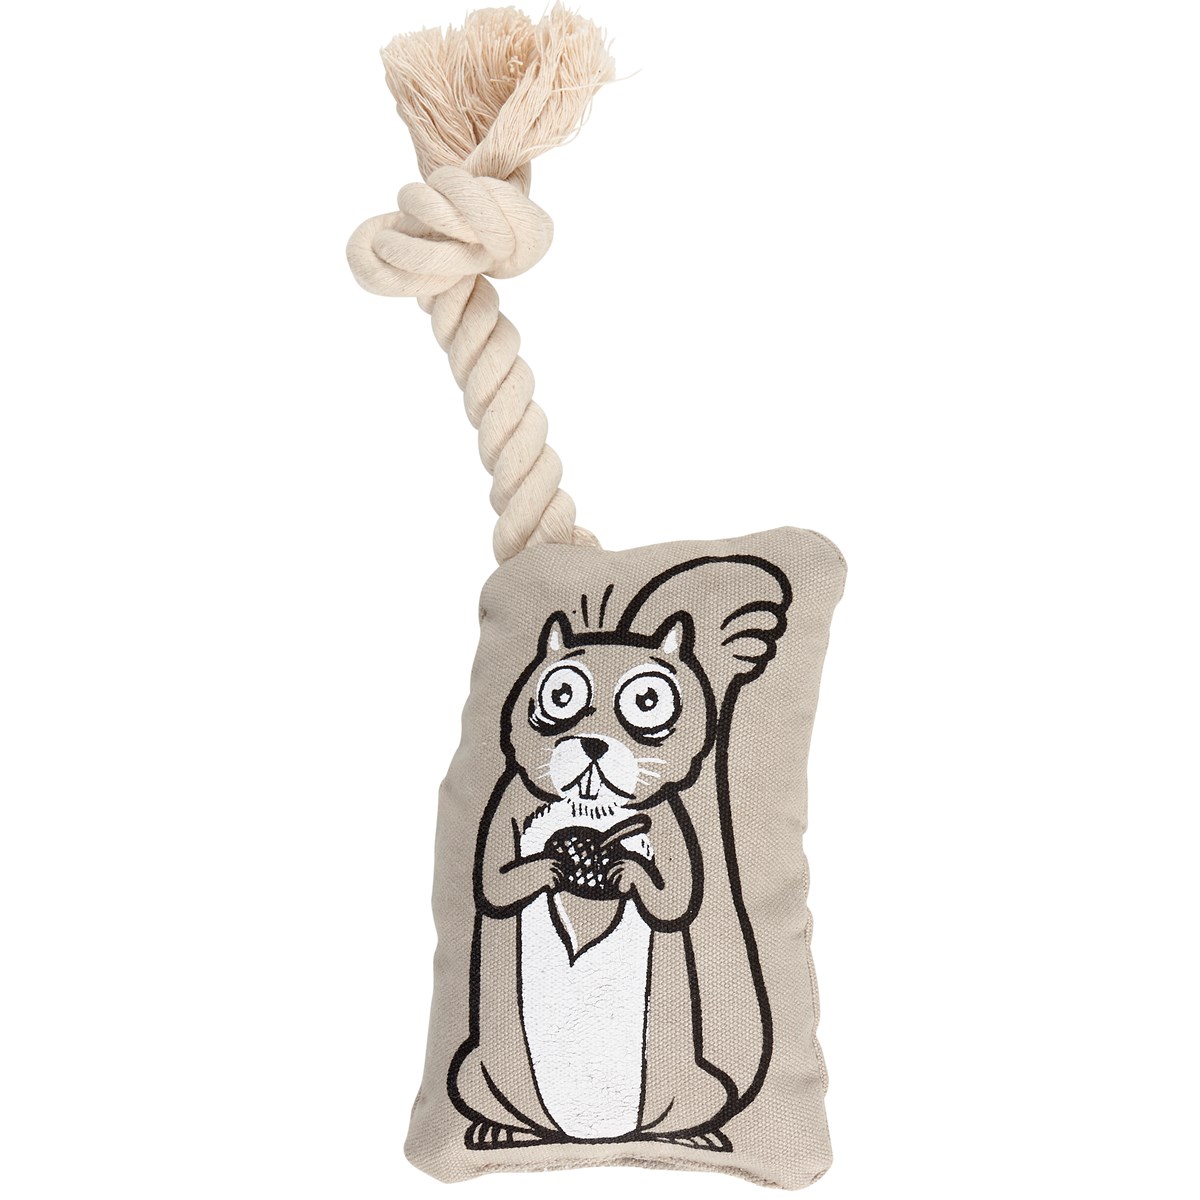 Squirrel Dog Toy - Cotton, Rope